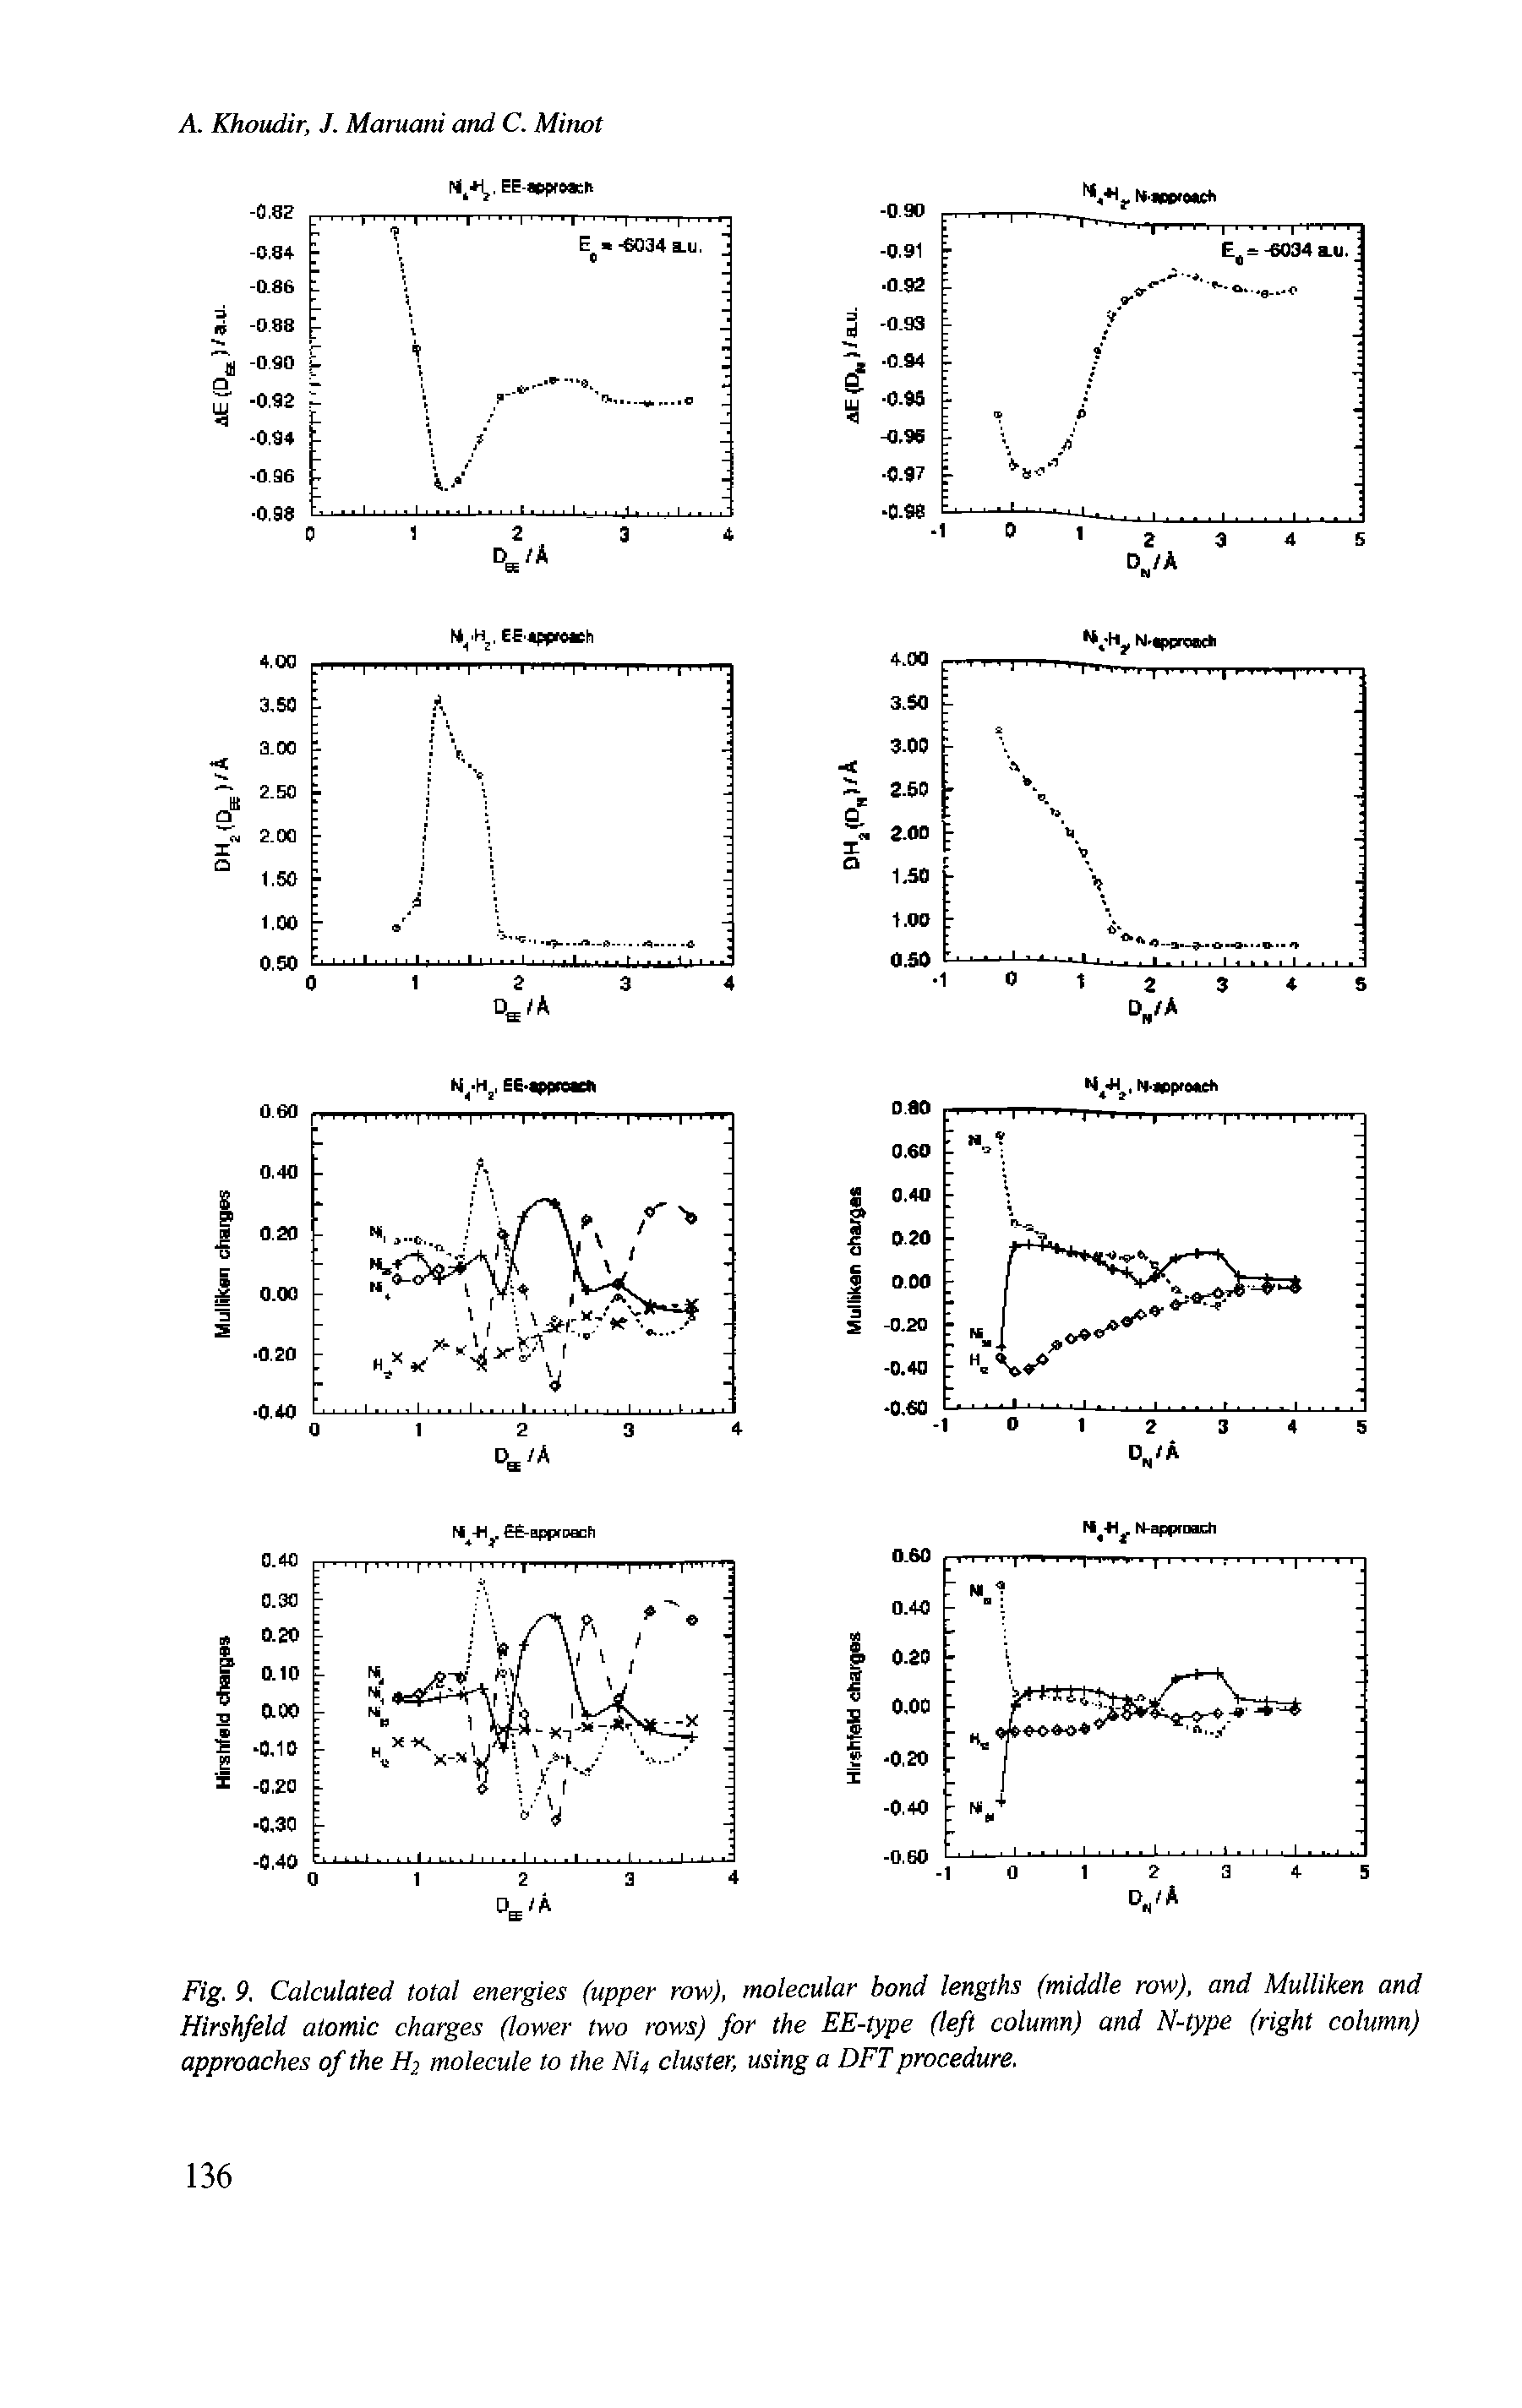 Fig. 9. Calculated total energies (upper row), molecular bond lengths (middle row), and Mulliken and Hirshfeld atomic charges (lower two rows) for the EE-type (left column) and N-type (right column) approaches of the H2 molecule to the Ni4 cluster, using a DFTprocedure.